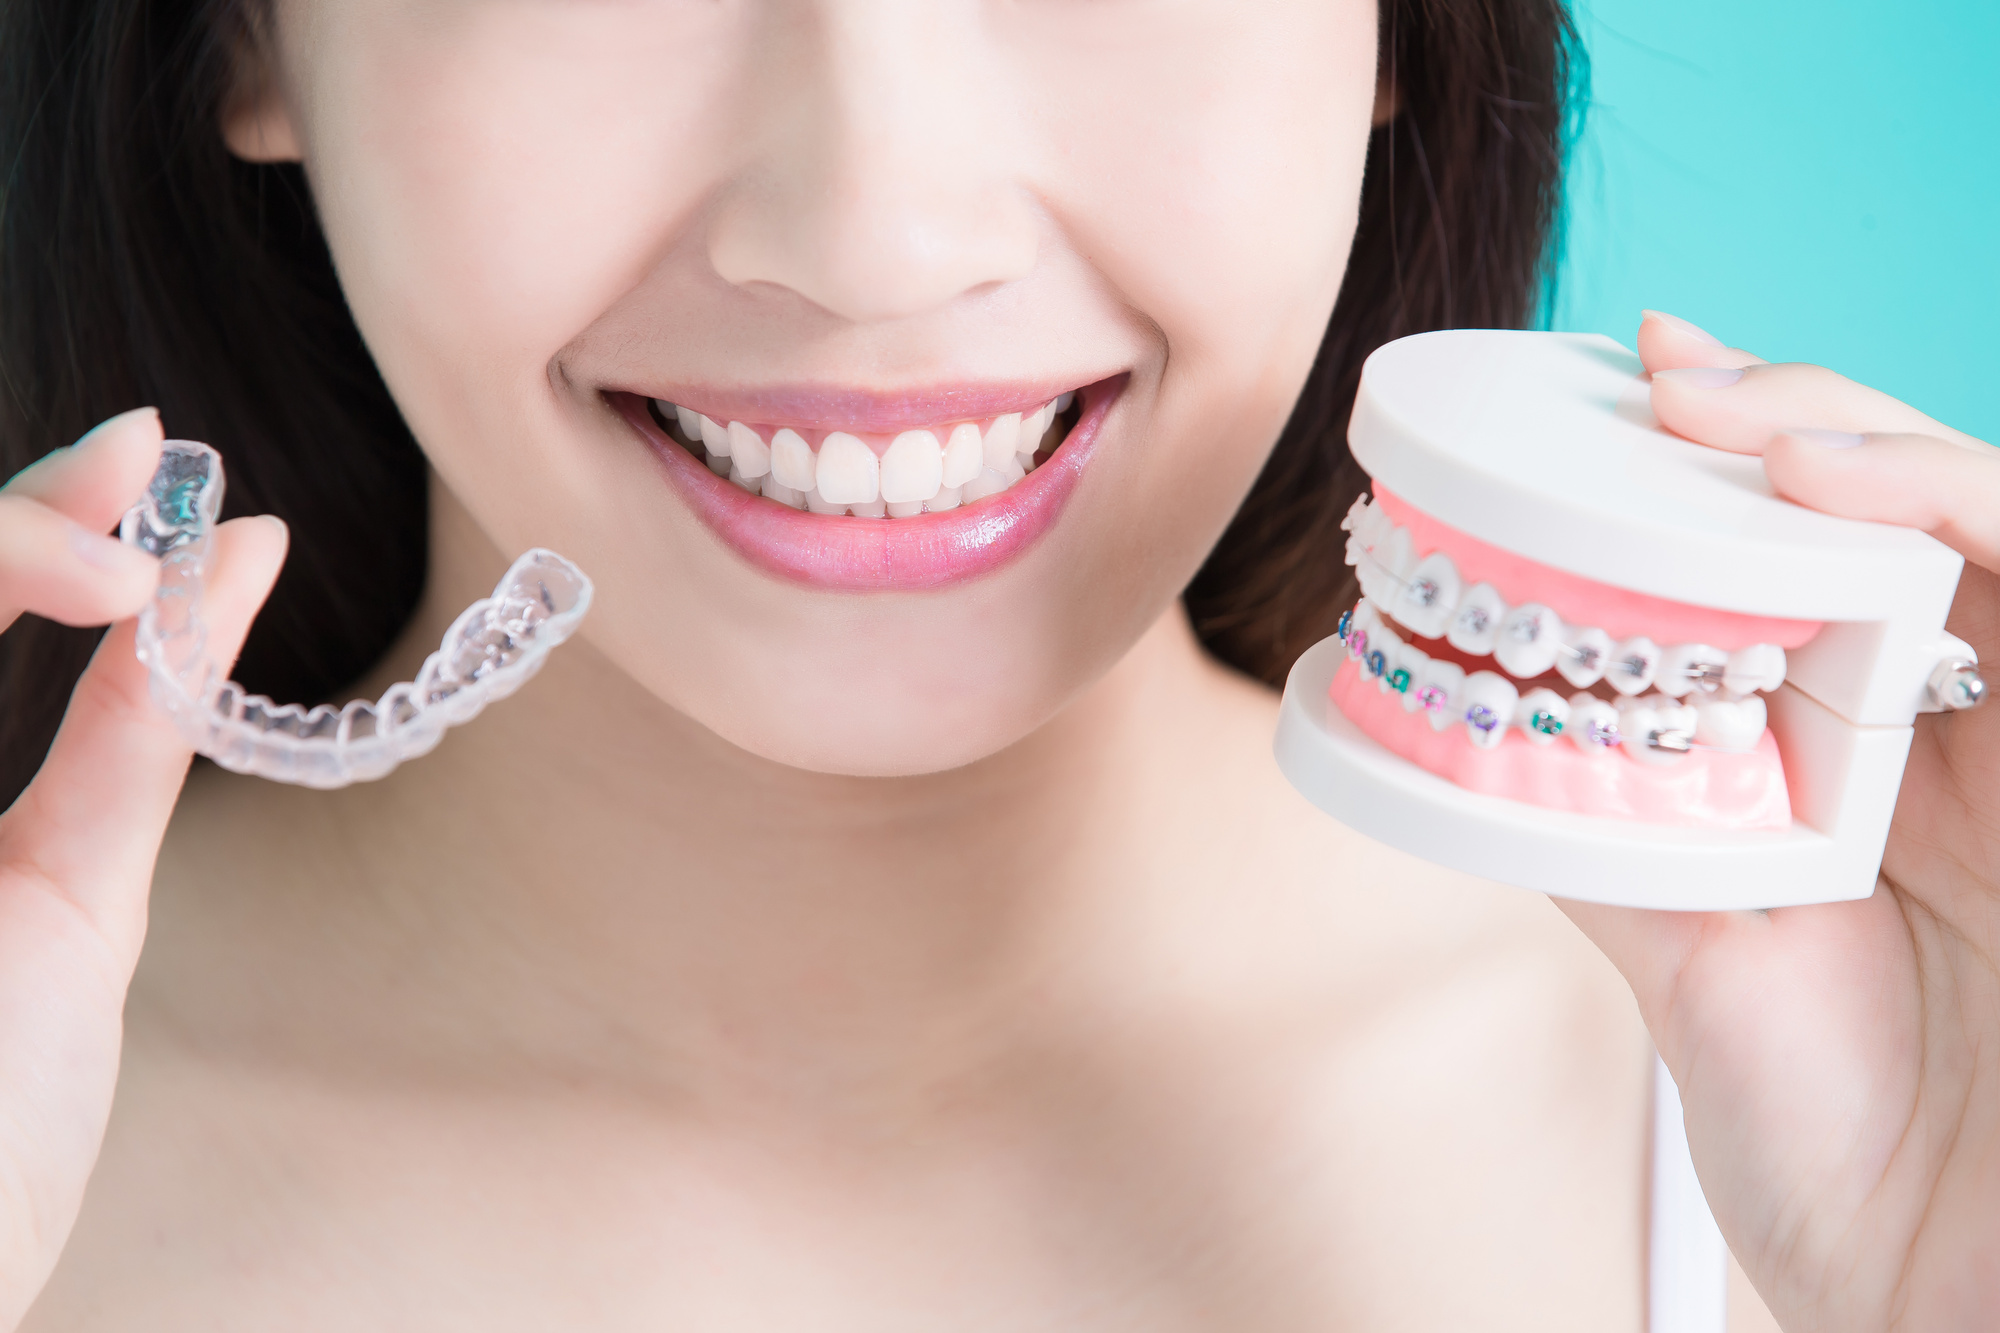 Are you wondering if Invisalign treatment is right for you? Click here for five important factors to consider before getting Invisalign.